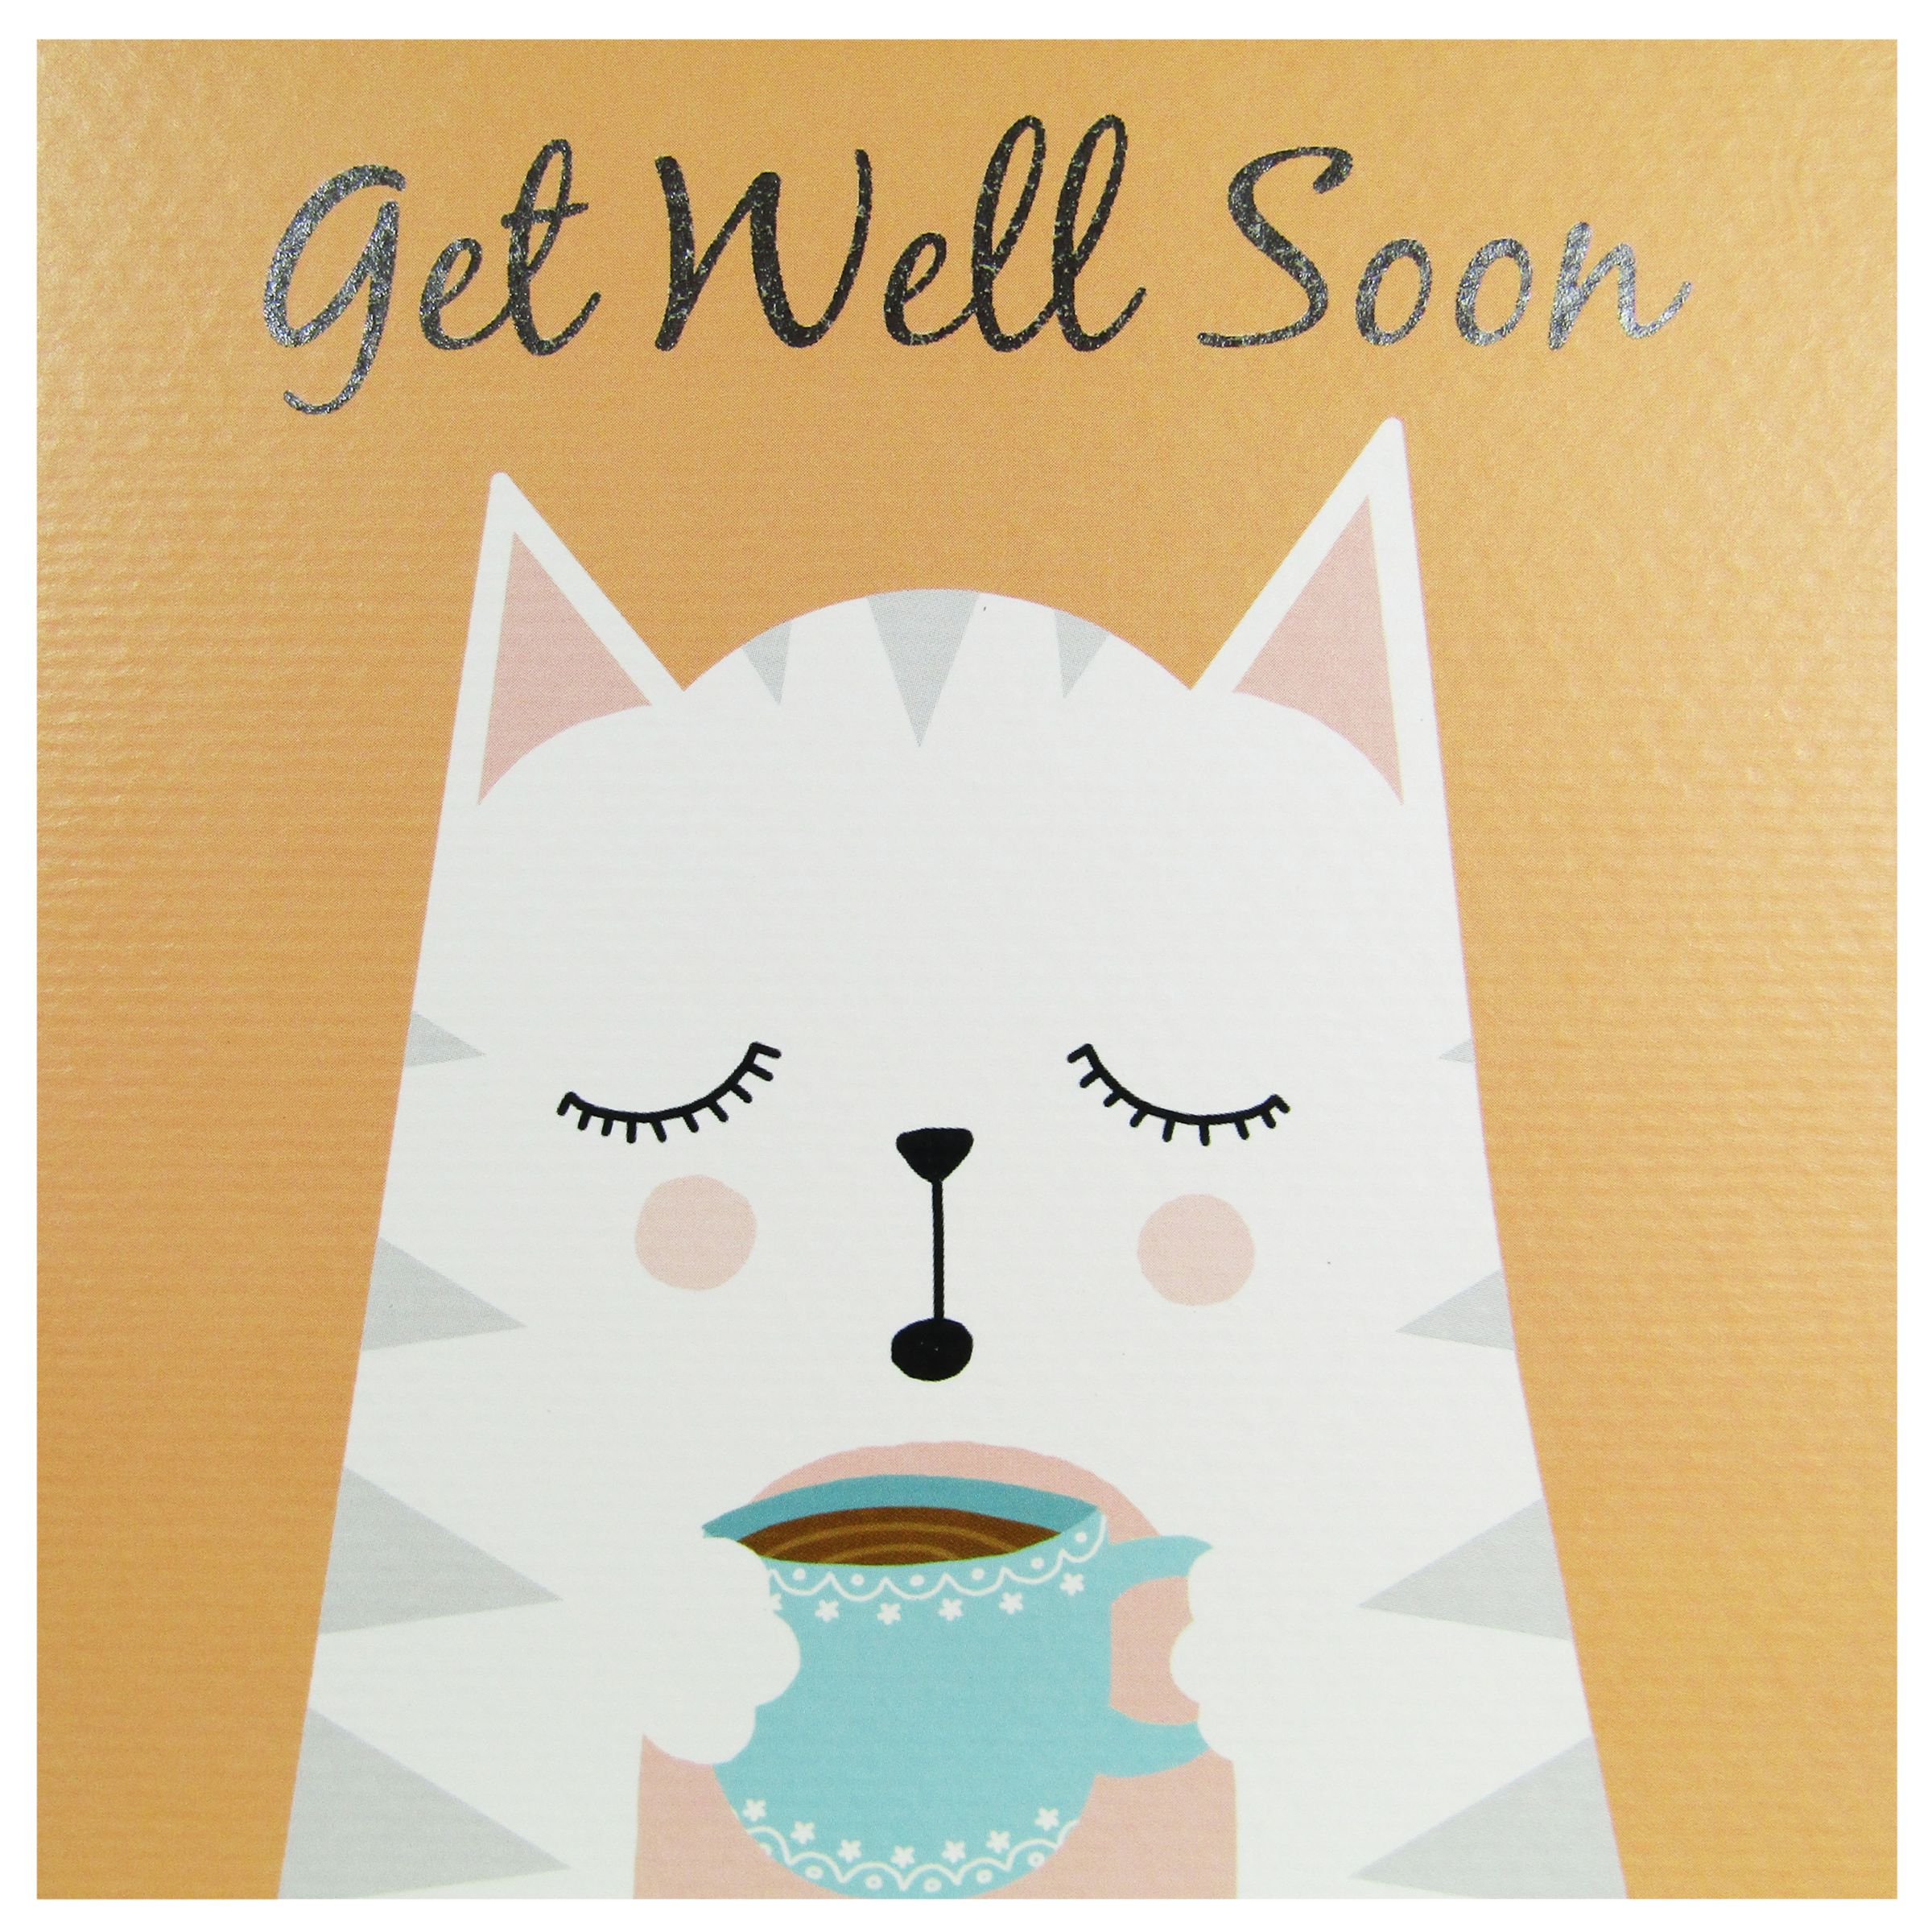 Get better picture. Открытка get well soon. Get well открытка. Get better soon открытка. Get well soon Card.